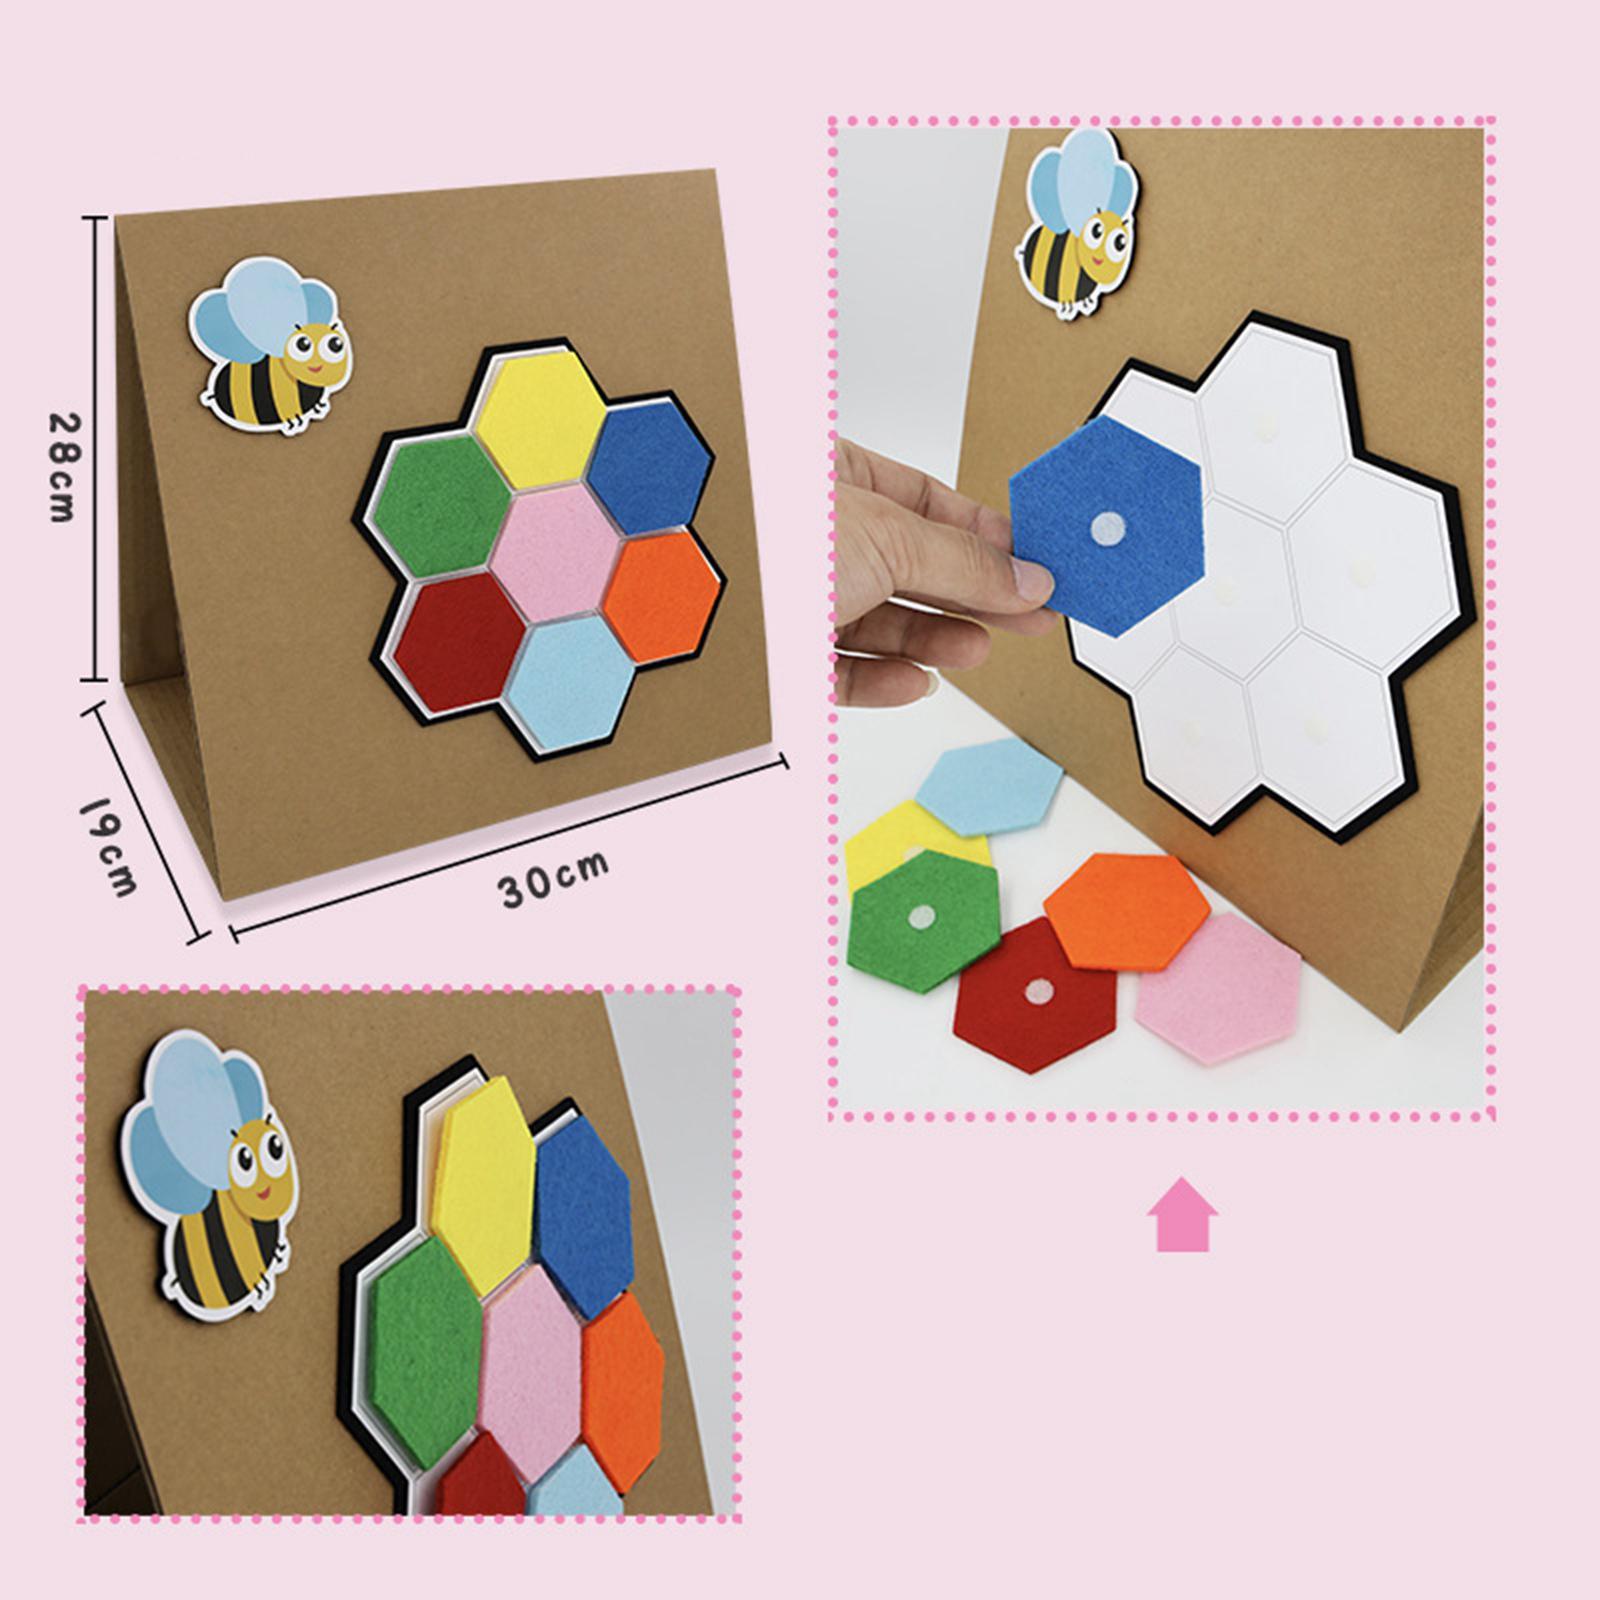 Montessori Material Color Shape Jigsaw Matching Game for Baby Boys Girls